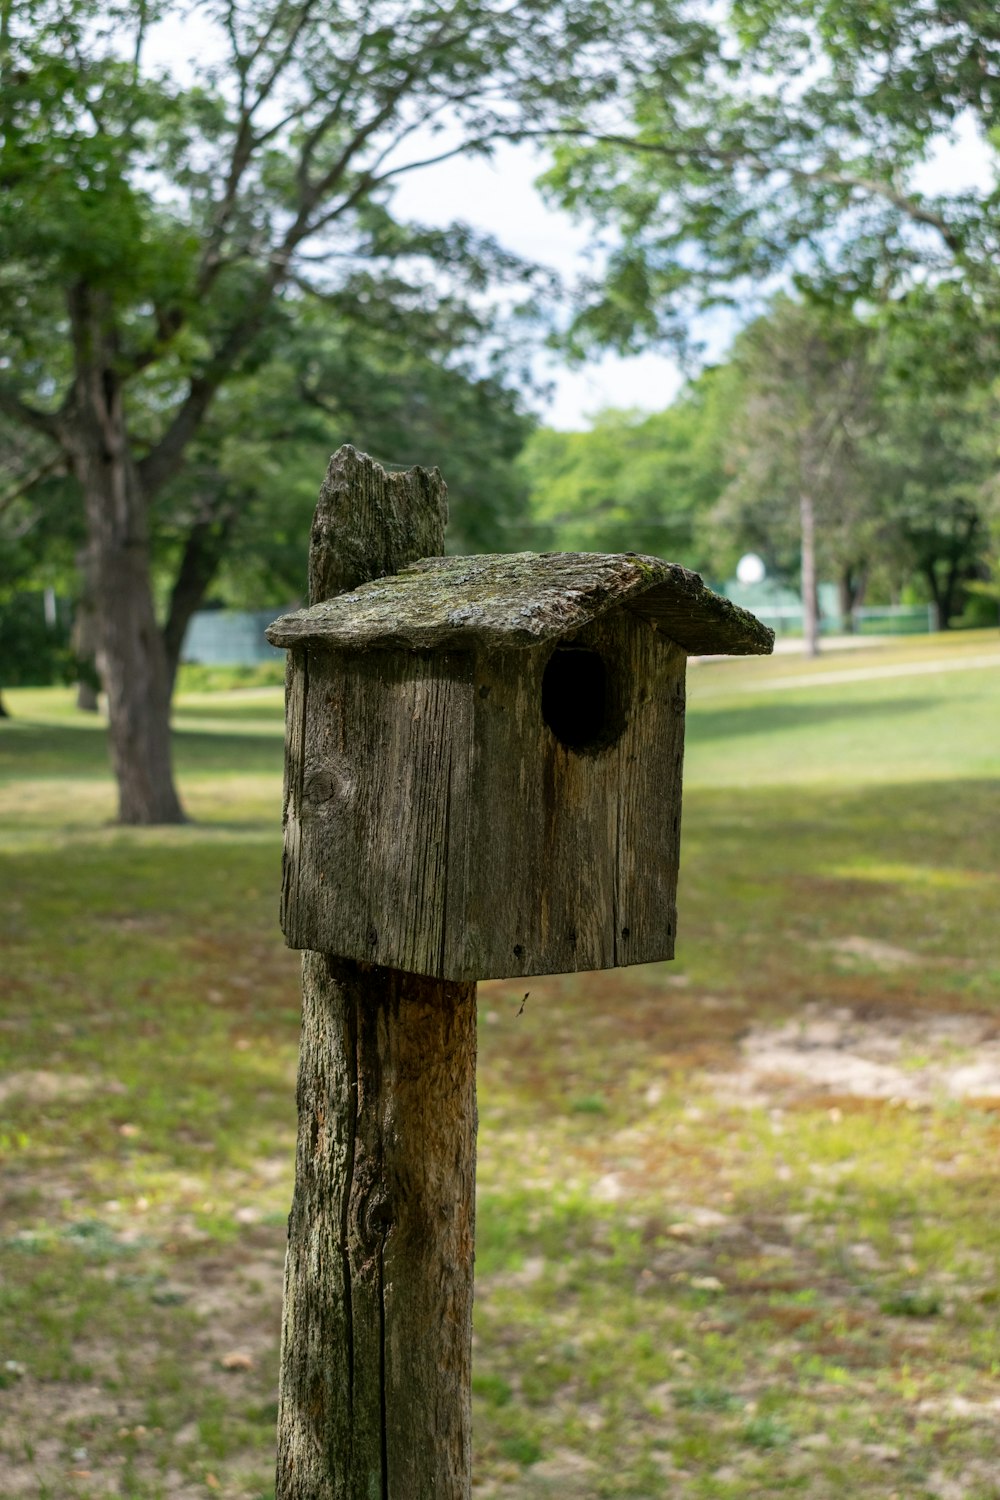 a wooden birdhouse sitting on top of a wooden post